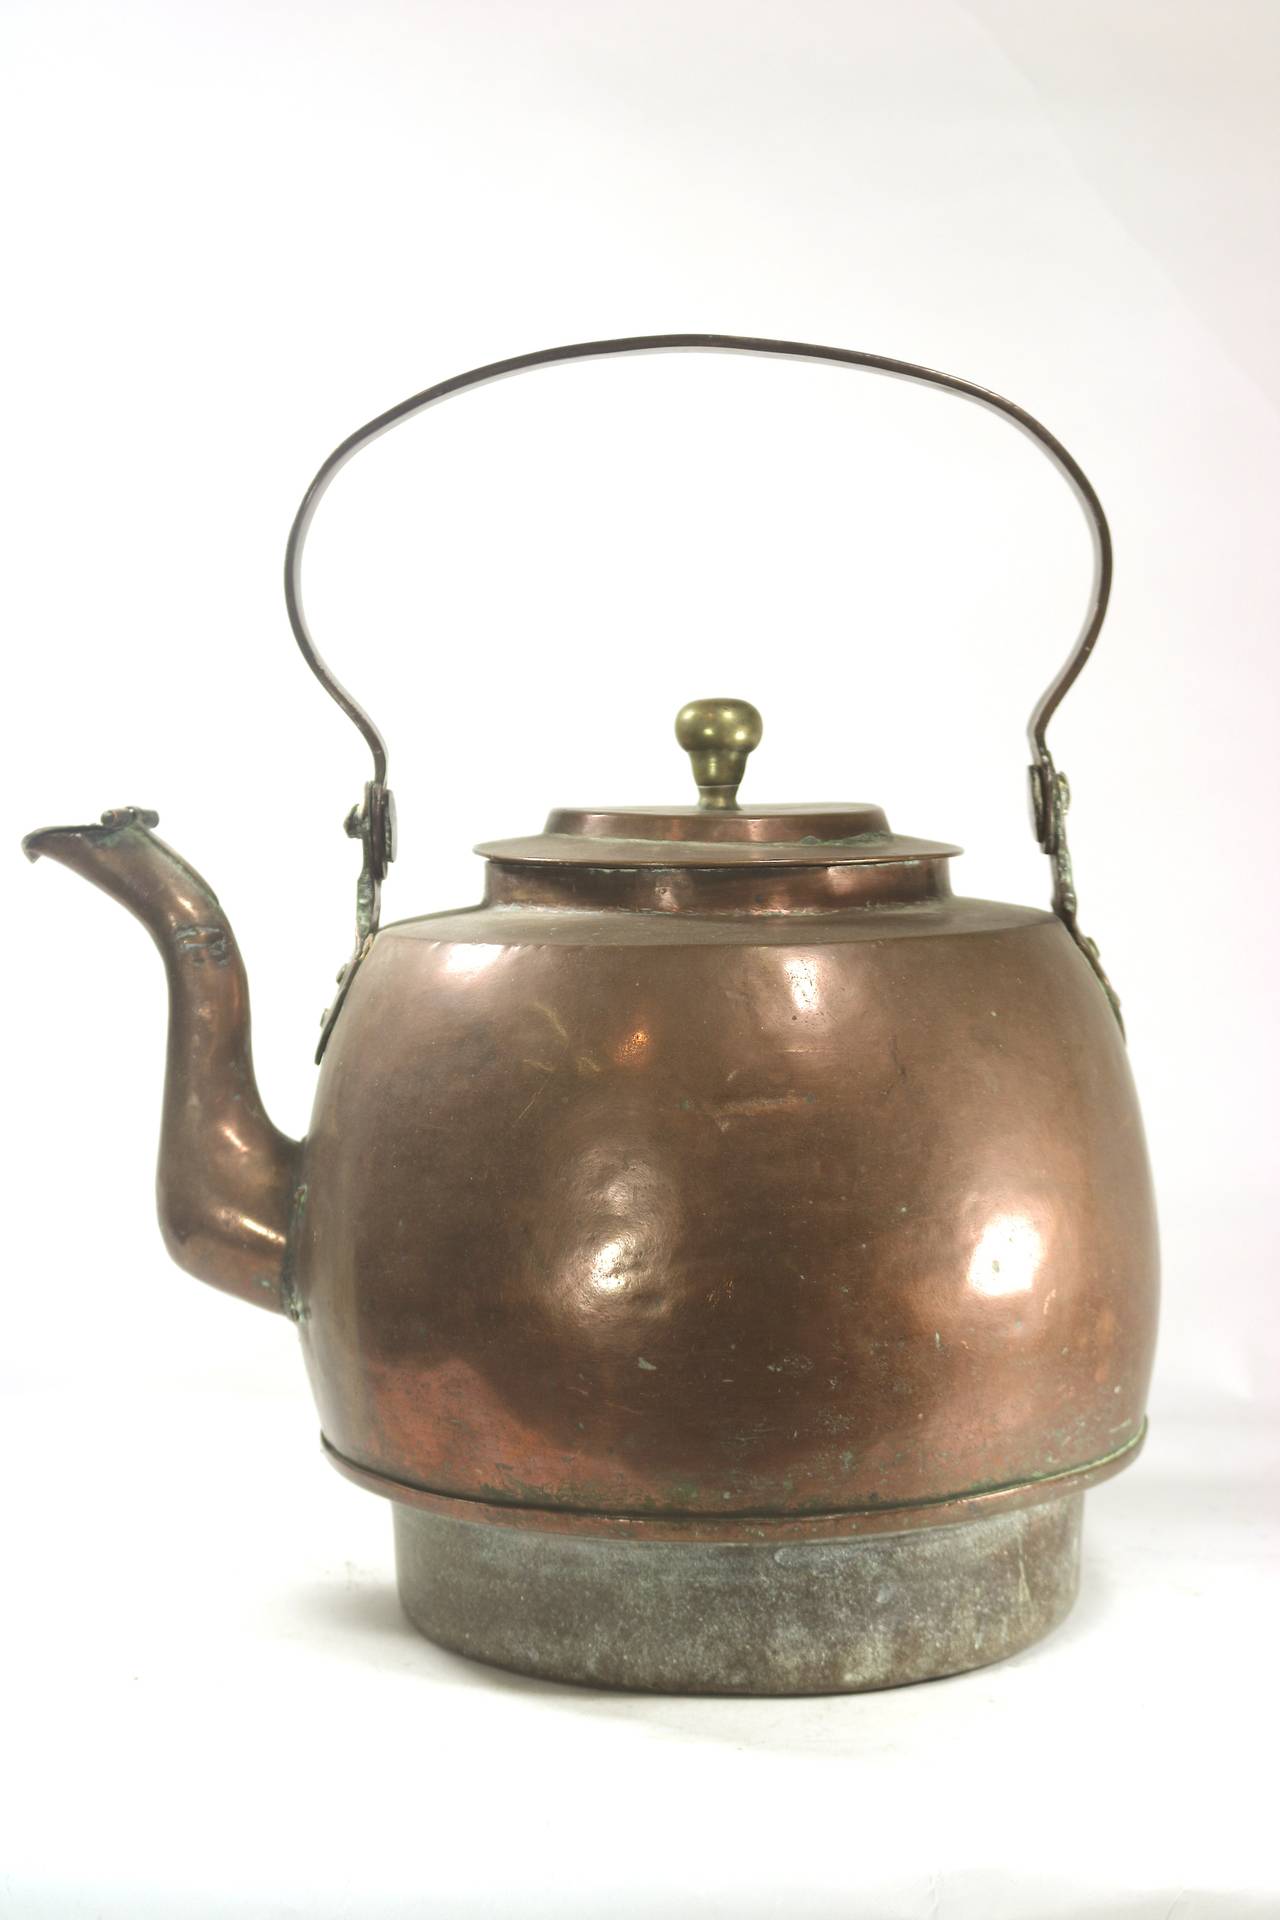 A very fine monumental classical 18th century hand-forged copper water kettle for the hearth fire used in the 18th century Home-Riveted handle, brass lid finial 17